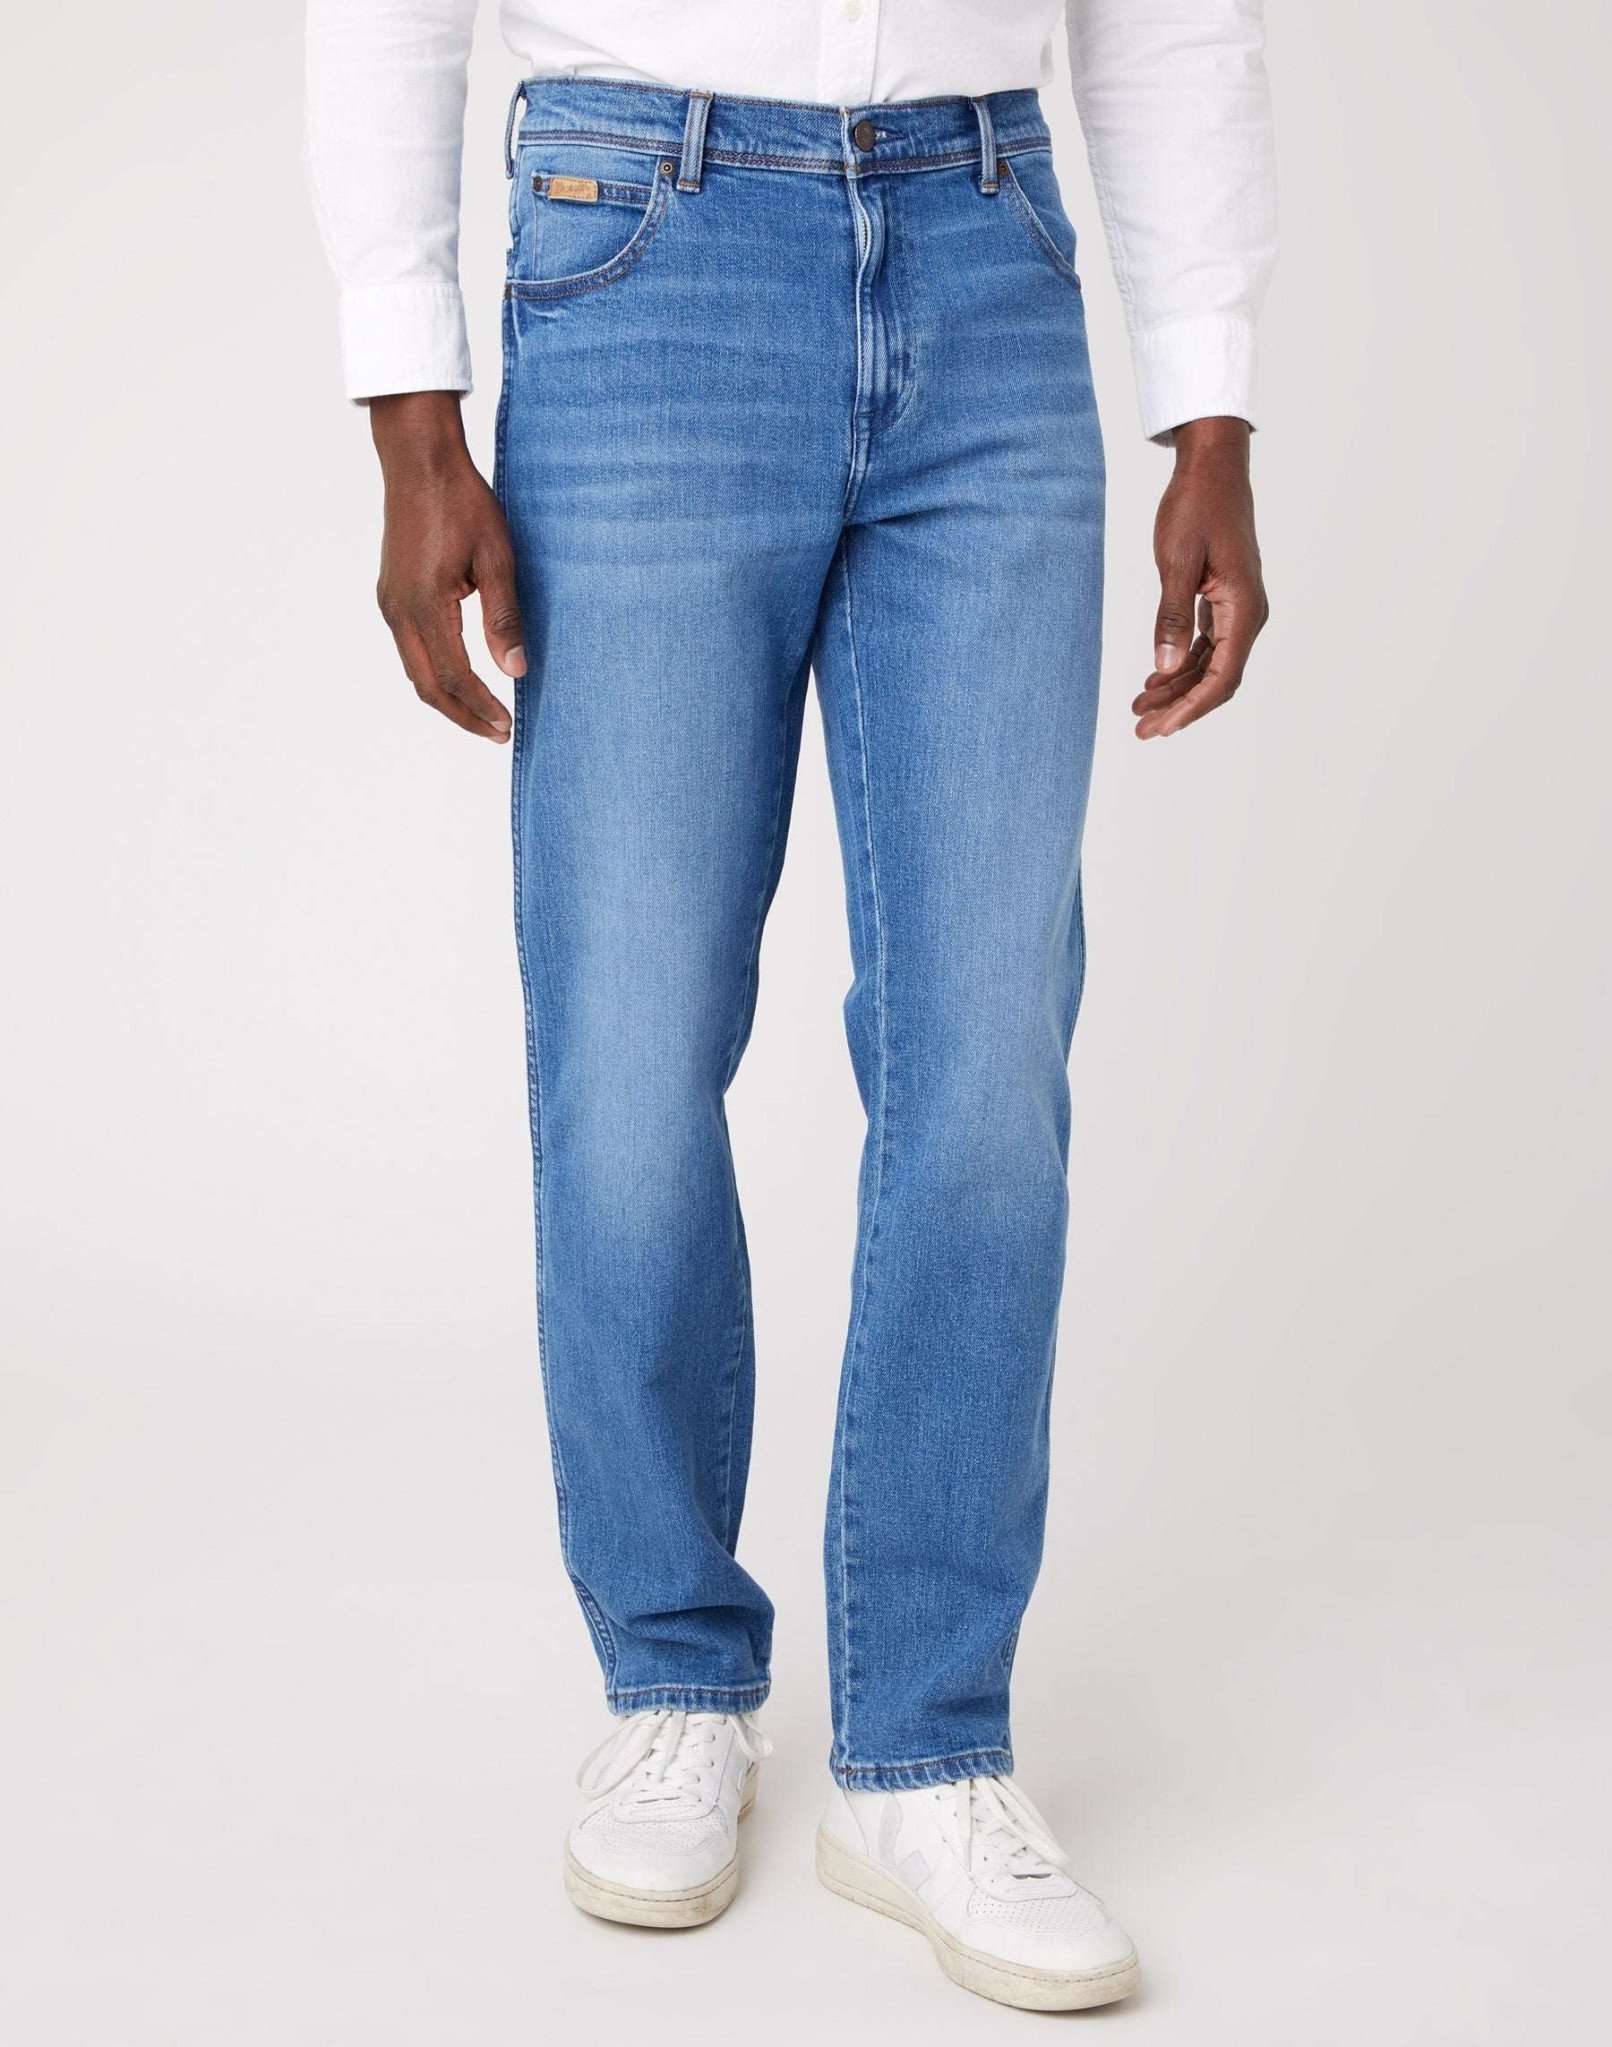 Texas Low Stretch in New Favorite Jeans Wrangler   